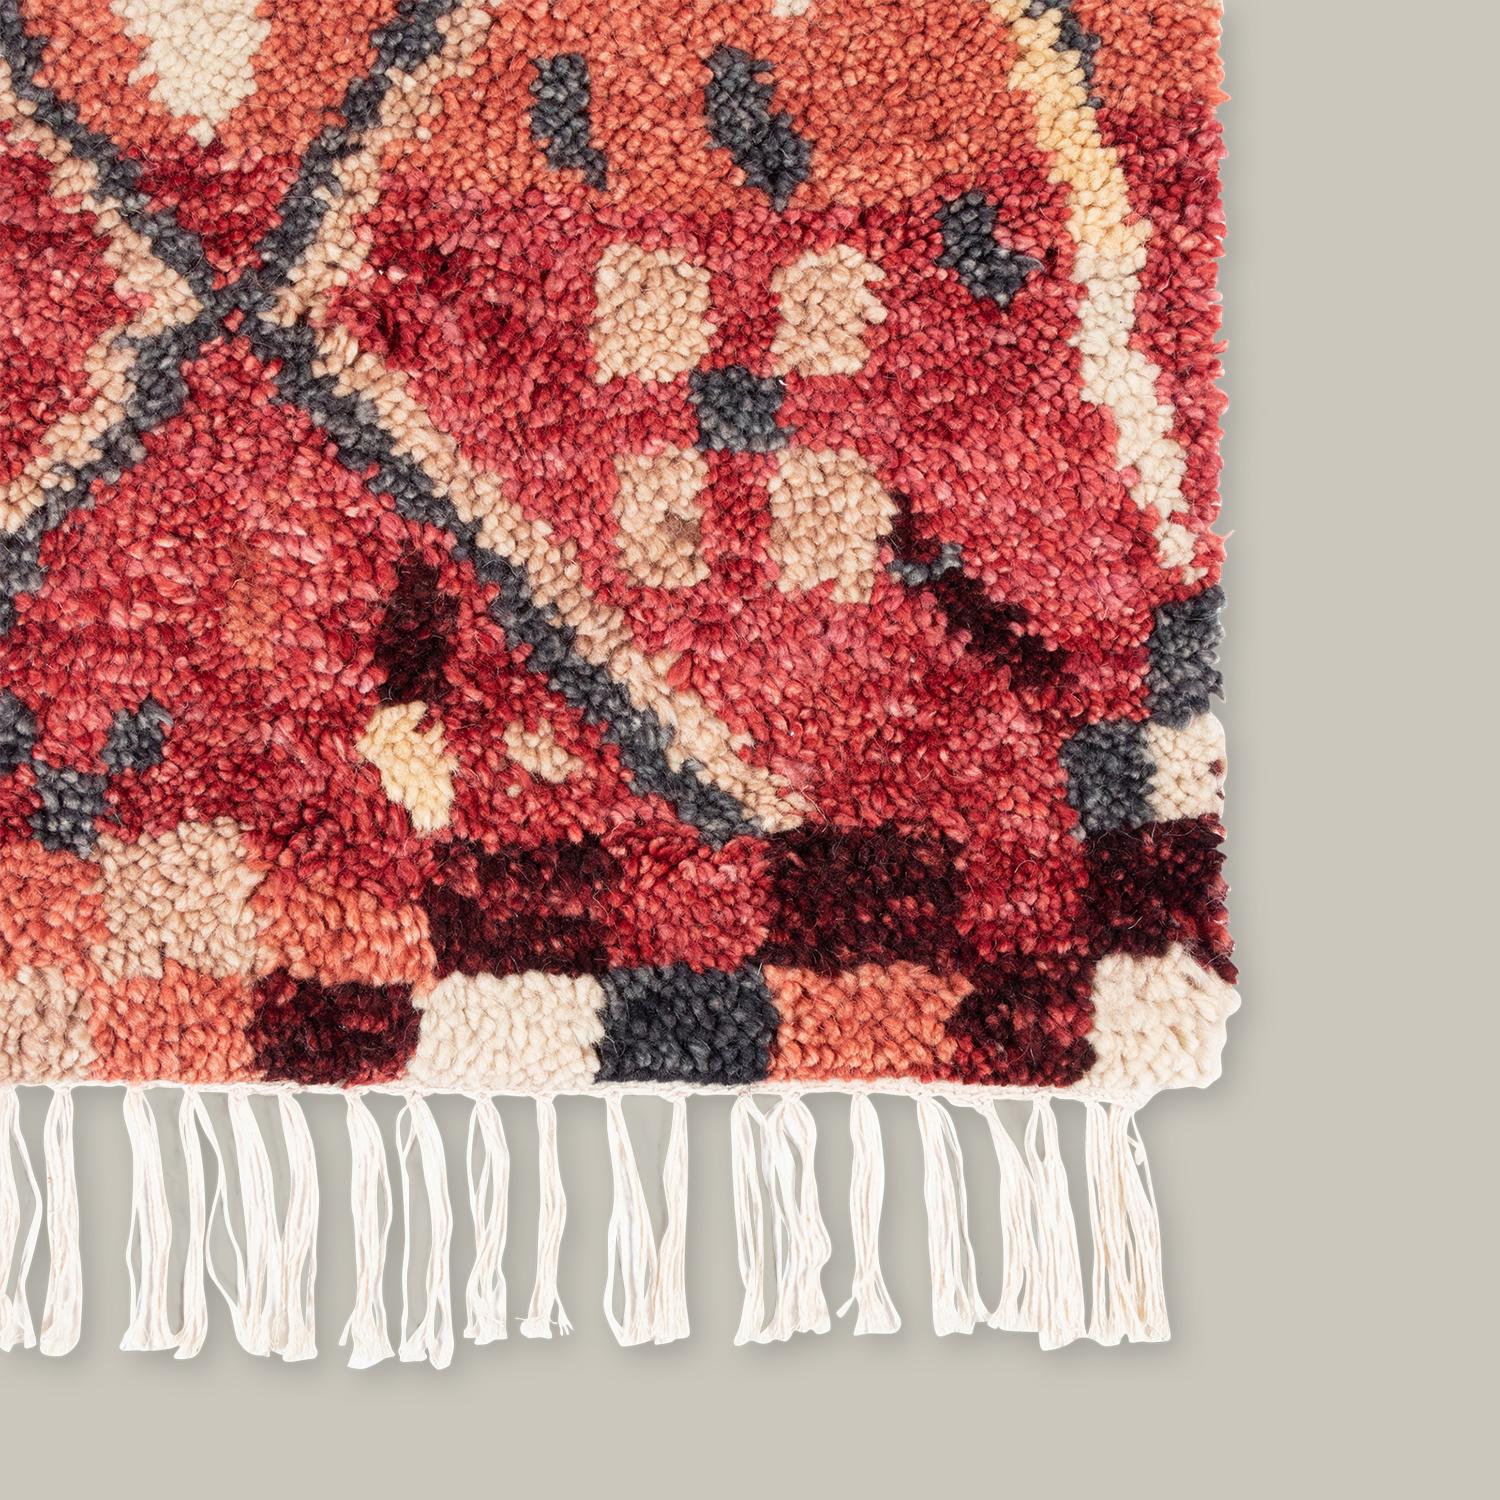 Traditional Moroccan rag rugs inspire the Doukkala Collection. Hand knotted out of wool, the pile is hand-shorn to create an irregularity in the look, forming a thick, almost cloud-like texture underfoot. The loosest interpretations of a Moroccan